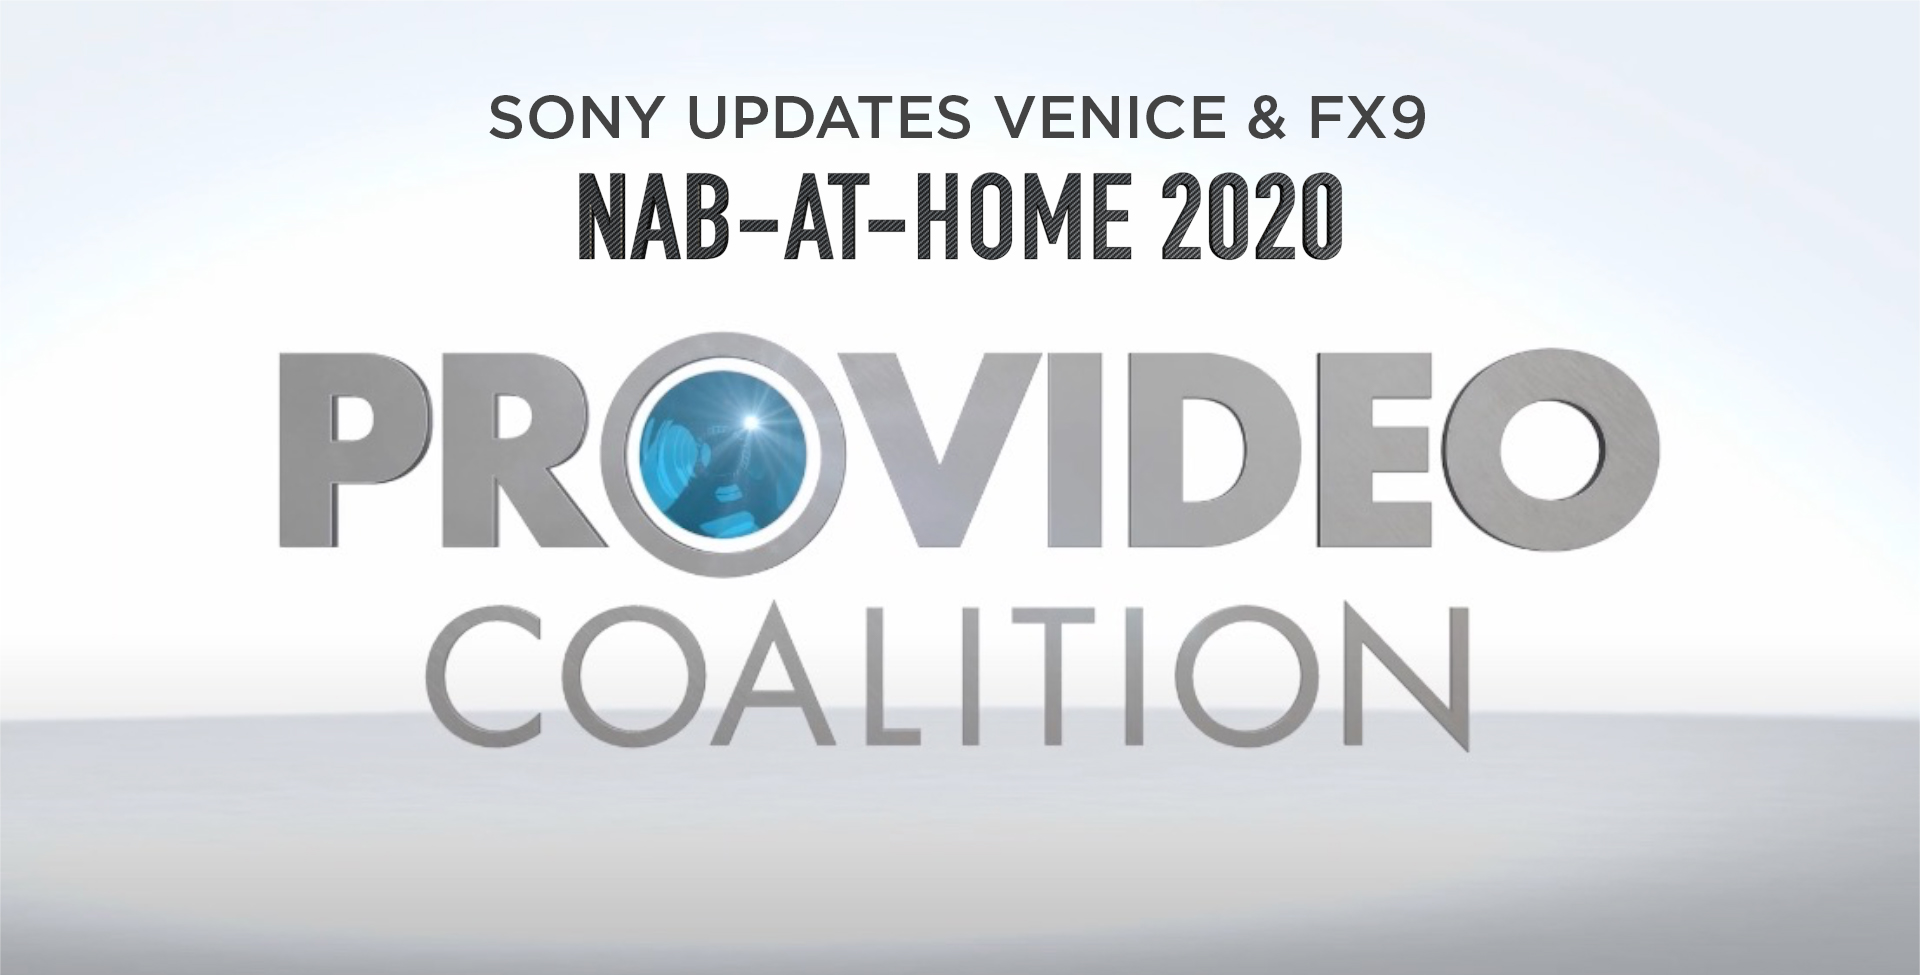 nab-at-home-2020-sony